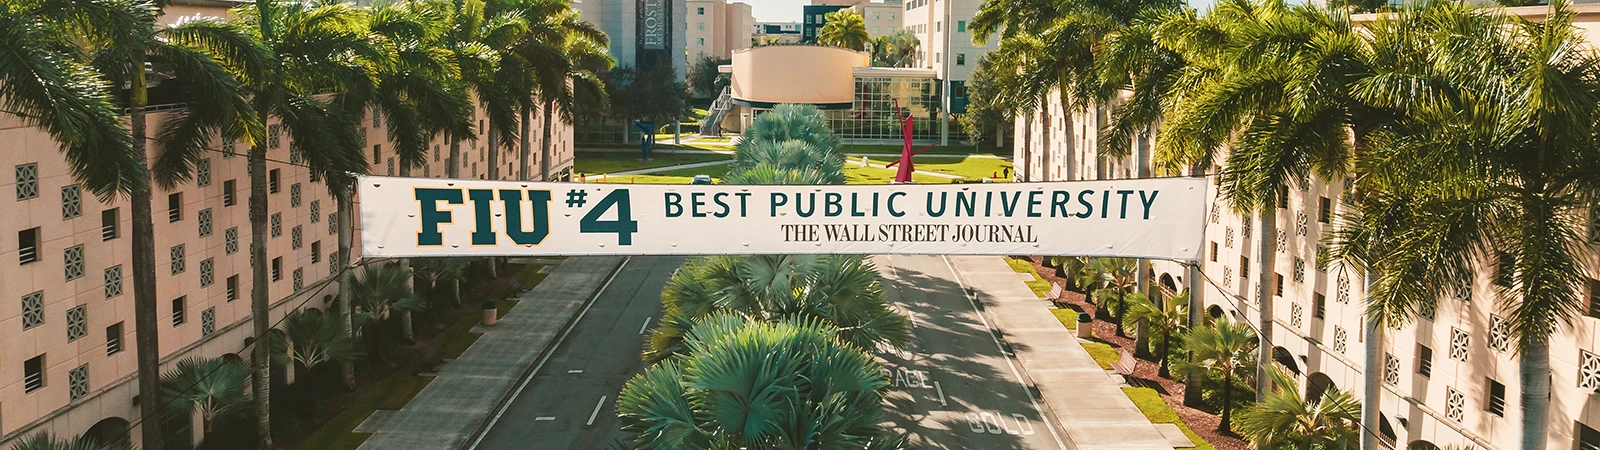 FIU is the No. 4 Best Public University according to The Wall Street Journal